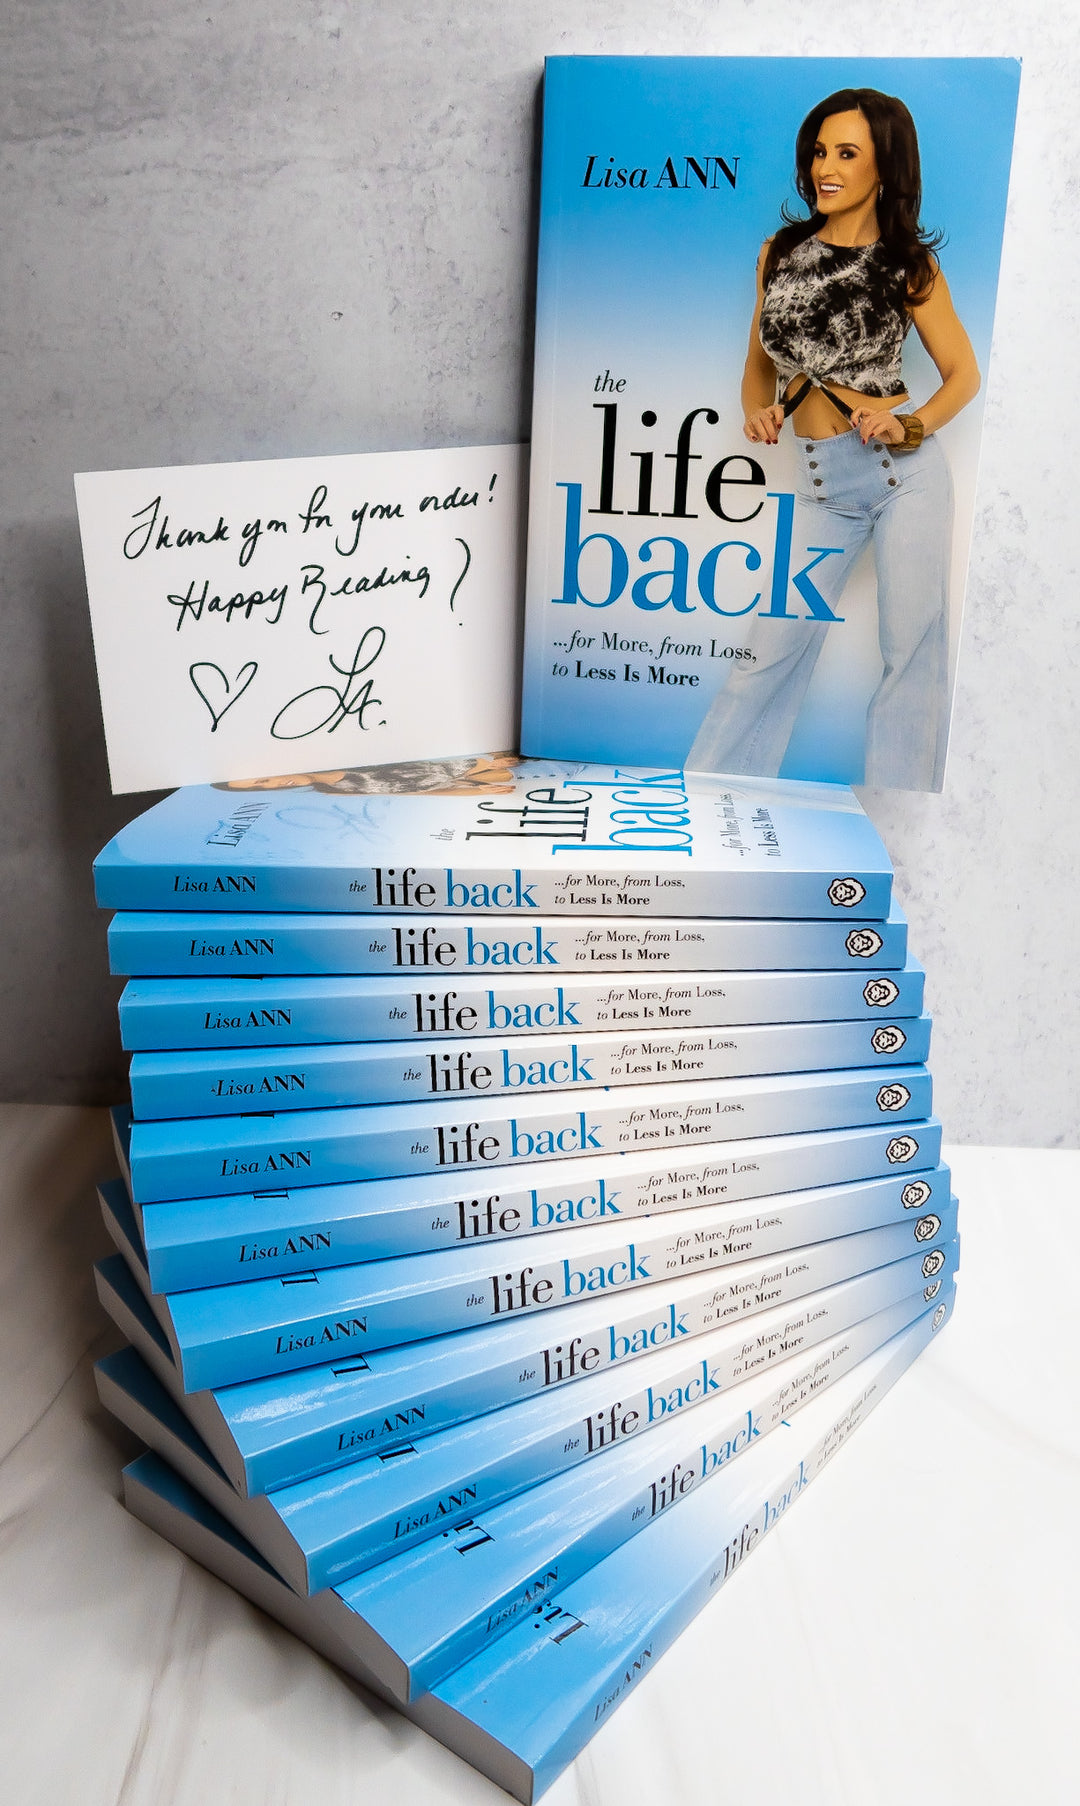 Lisa Ann “The Life Back” Signed Autobiography - FANS UTOPIA